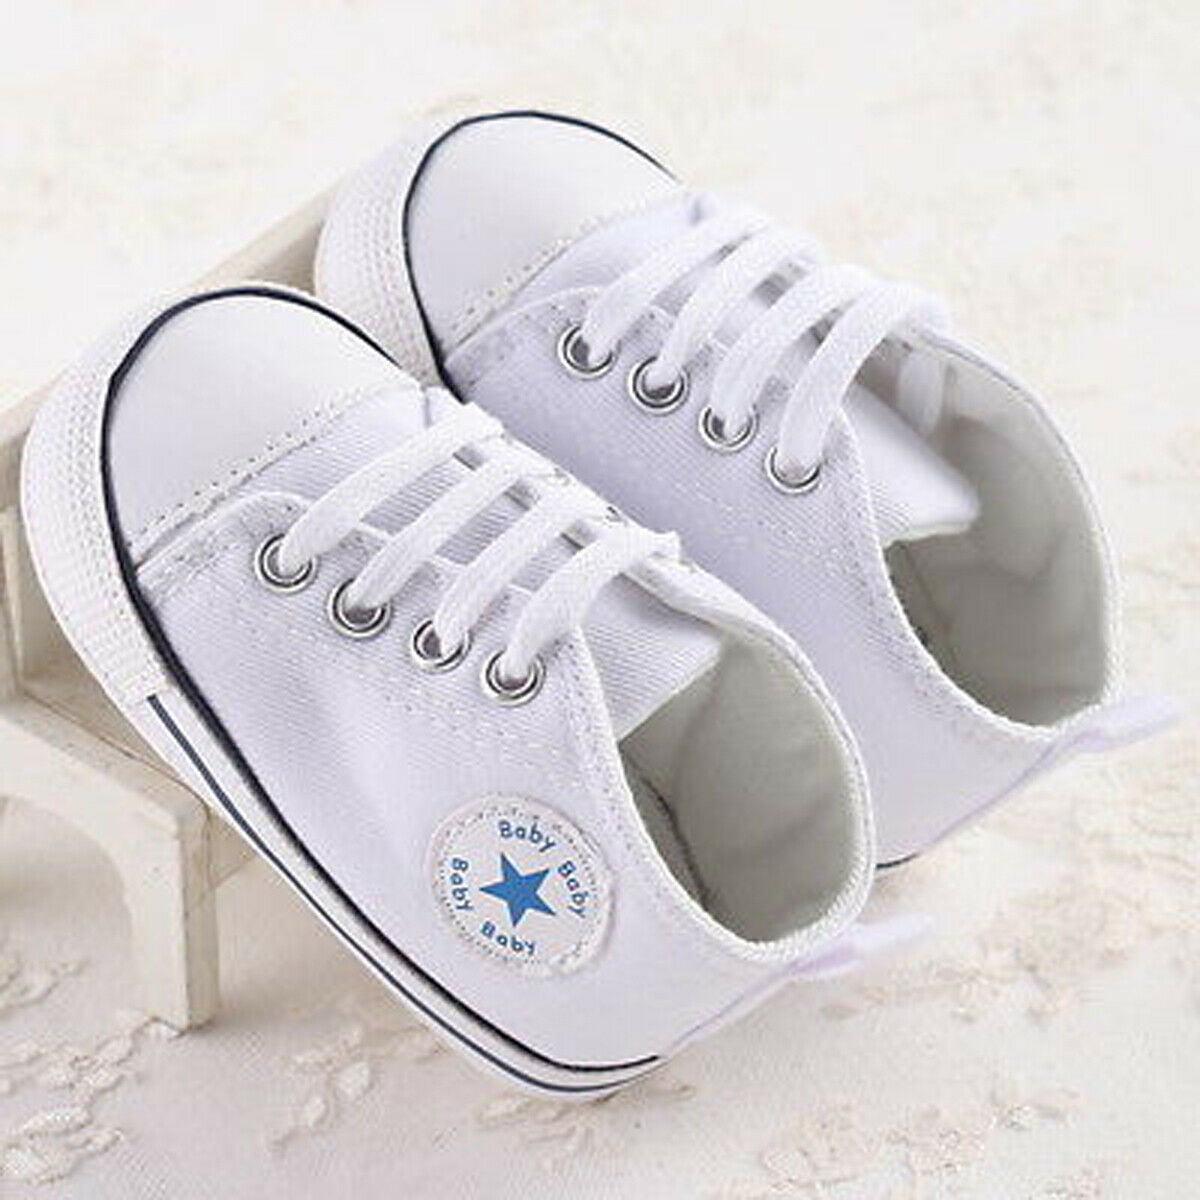 Infant Toddler Baby Boy Girl Soft Sole Crib Shoes Sneaker Newborn to 18 Months 